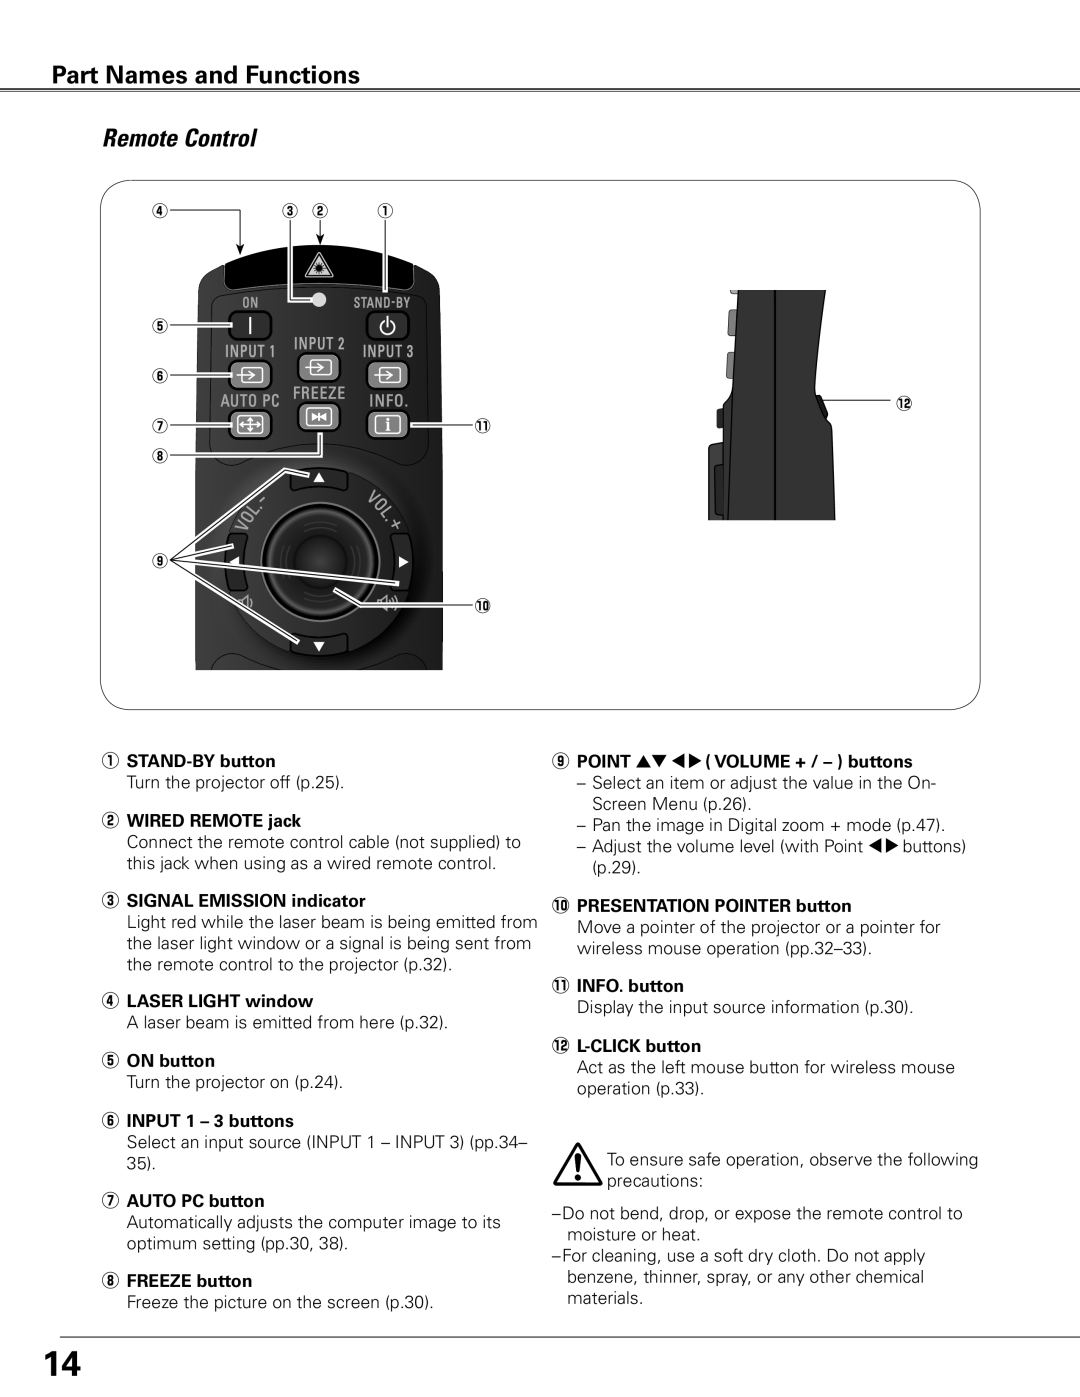 Sanyo WTC500L owner manual Remote Control, Part Names and Functions 